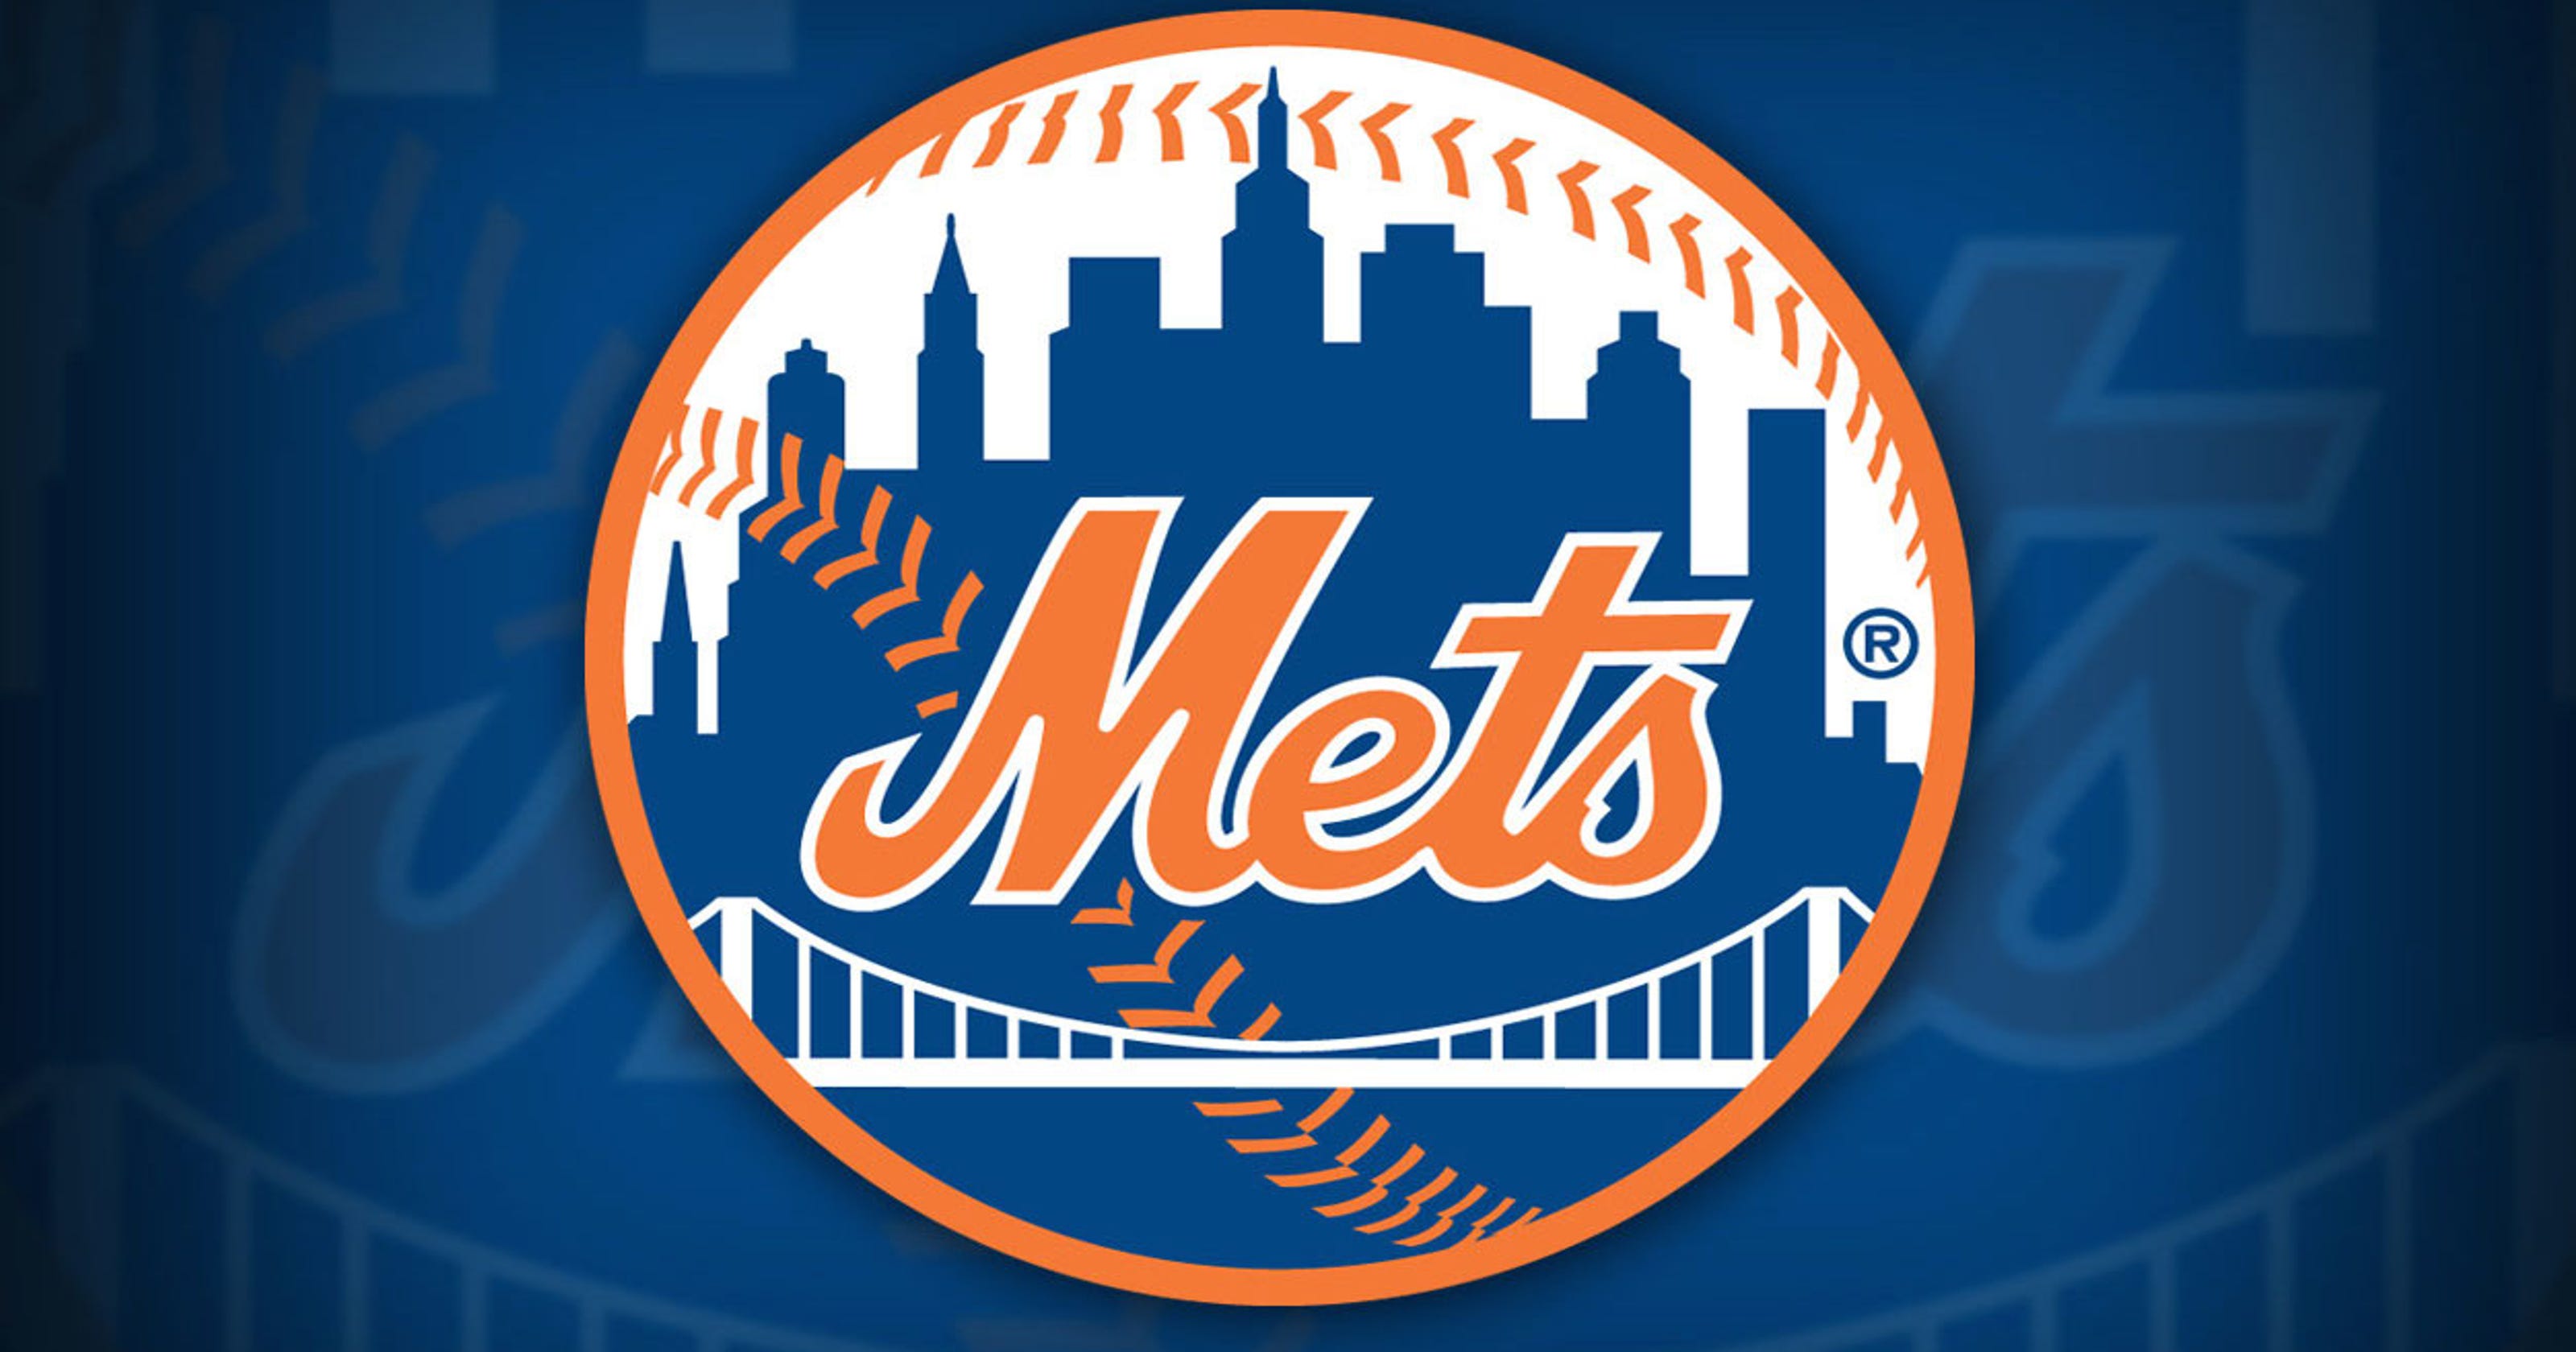 NY Mets move to WCBS 880 AM starting in 2019